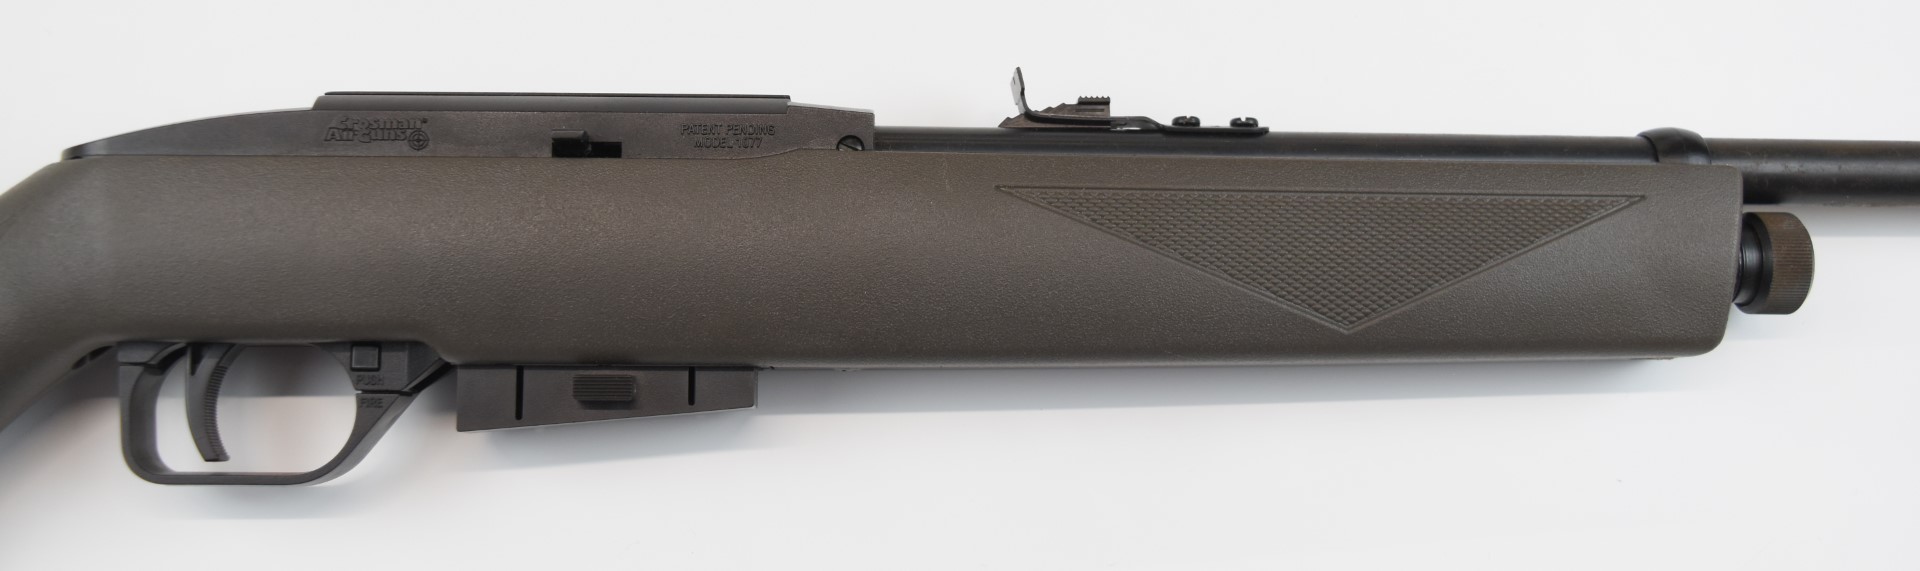 Crosman Model 1077 repeater .177 CO2 air rifle with chequered semi-pistol grip, composite stock, - Image 5 of 18